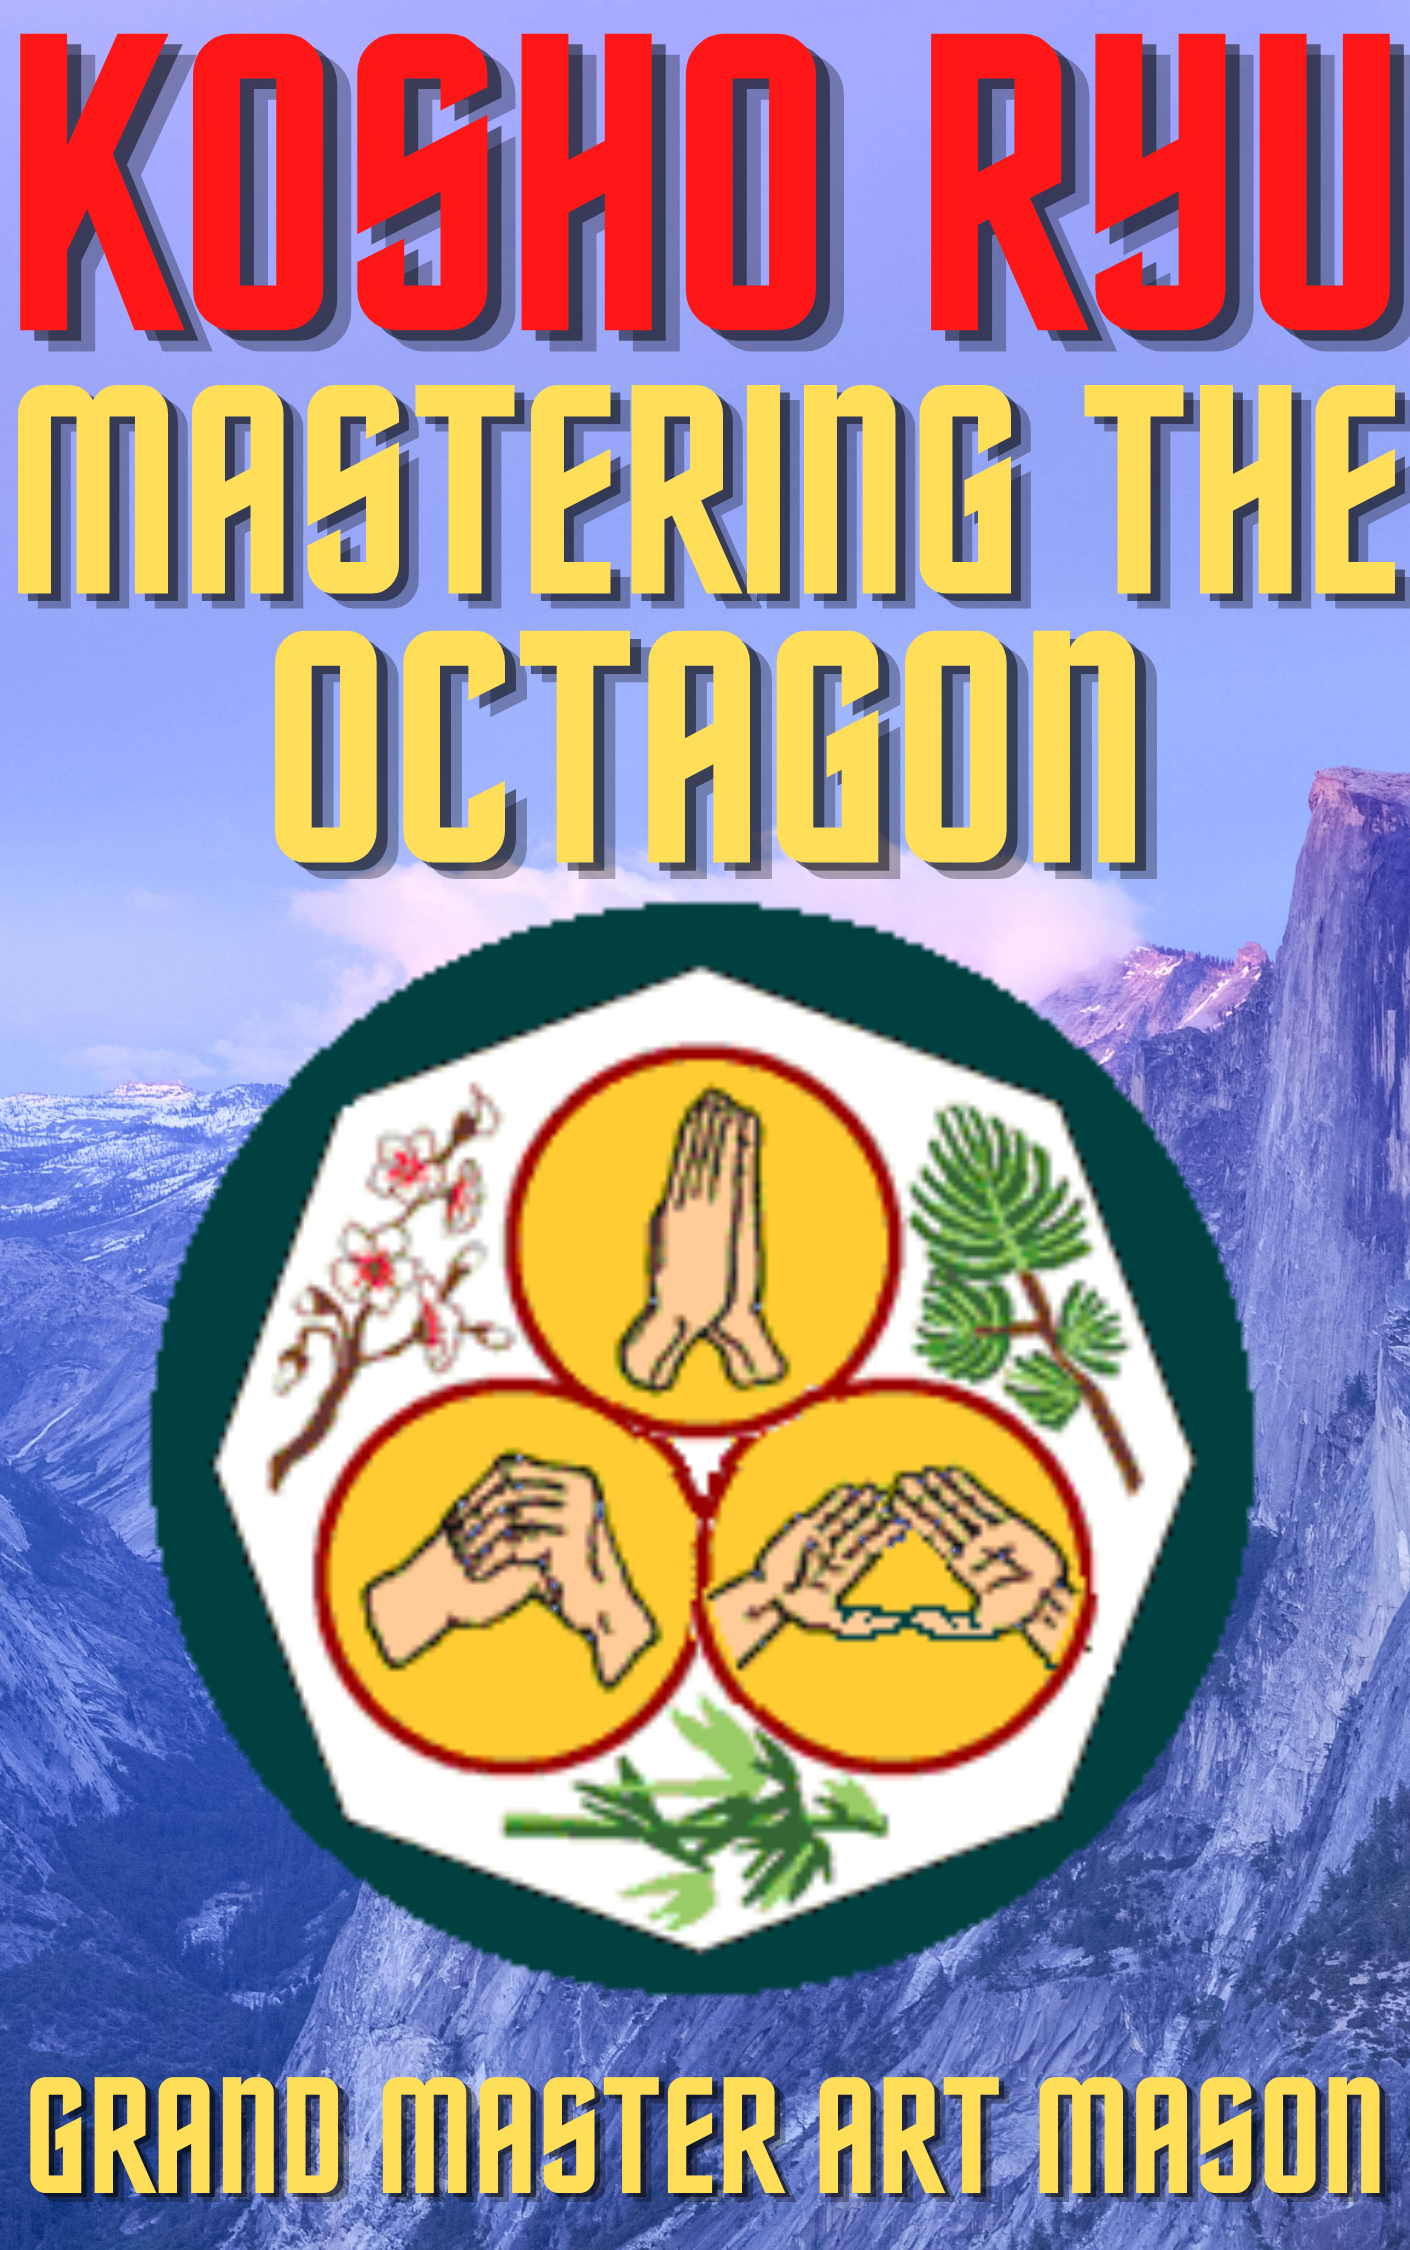 * Mastering the Octagon